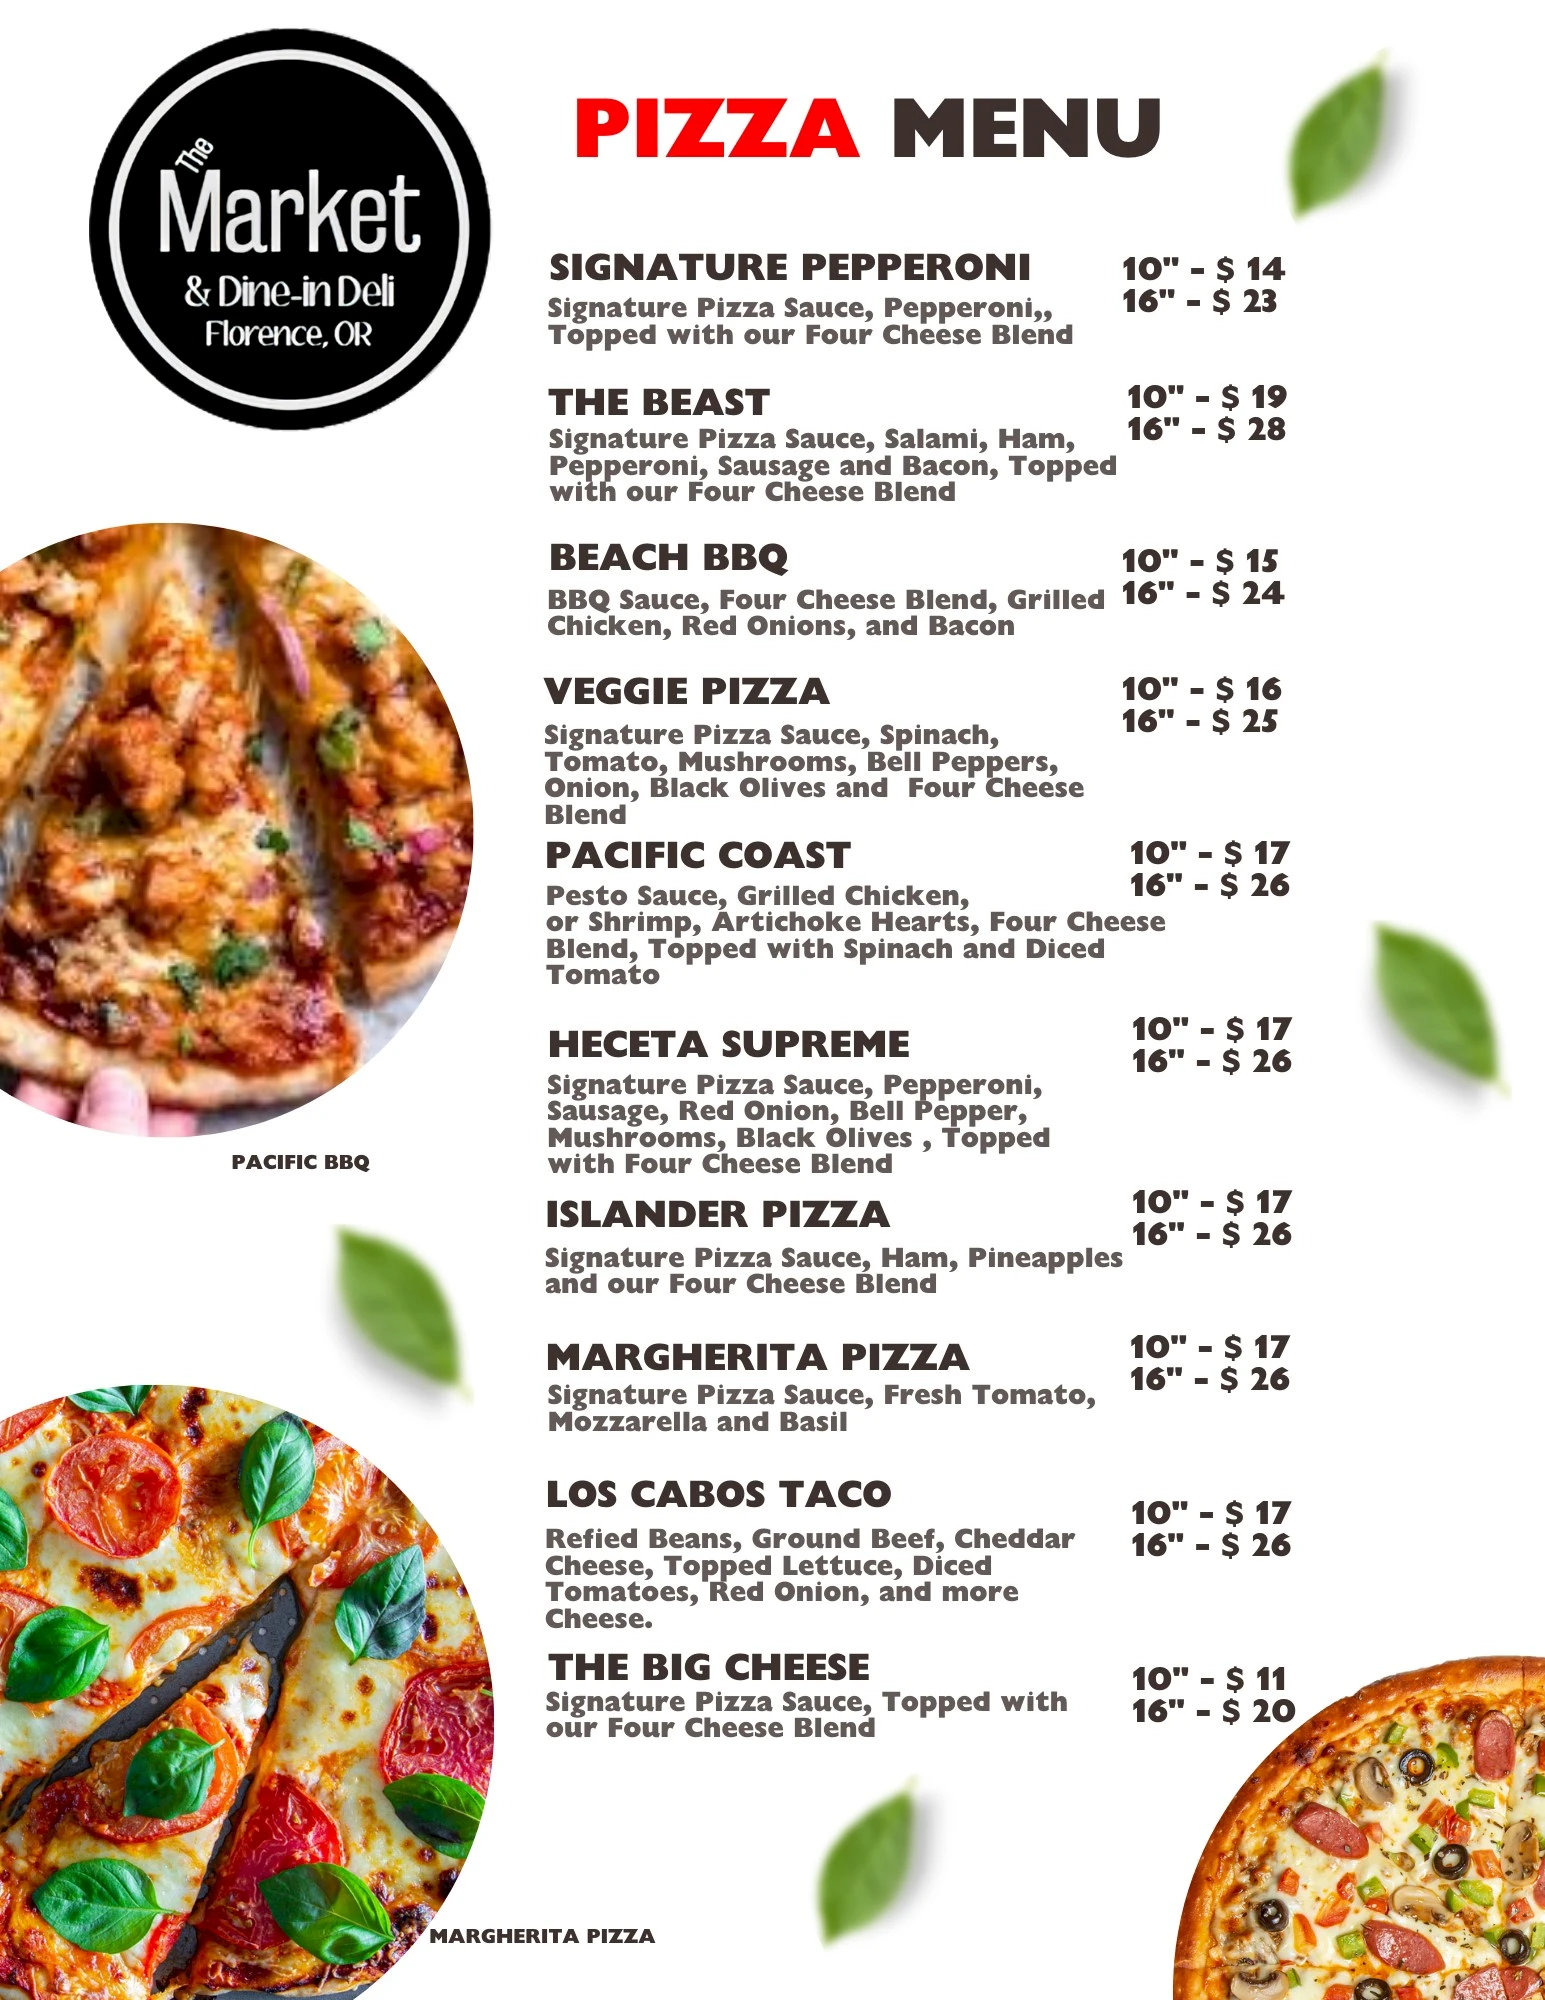 This is a specialty pizza menu including options such as "The Beast" meat pizza and "The Big Cheese" the house cheese pizza option.